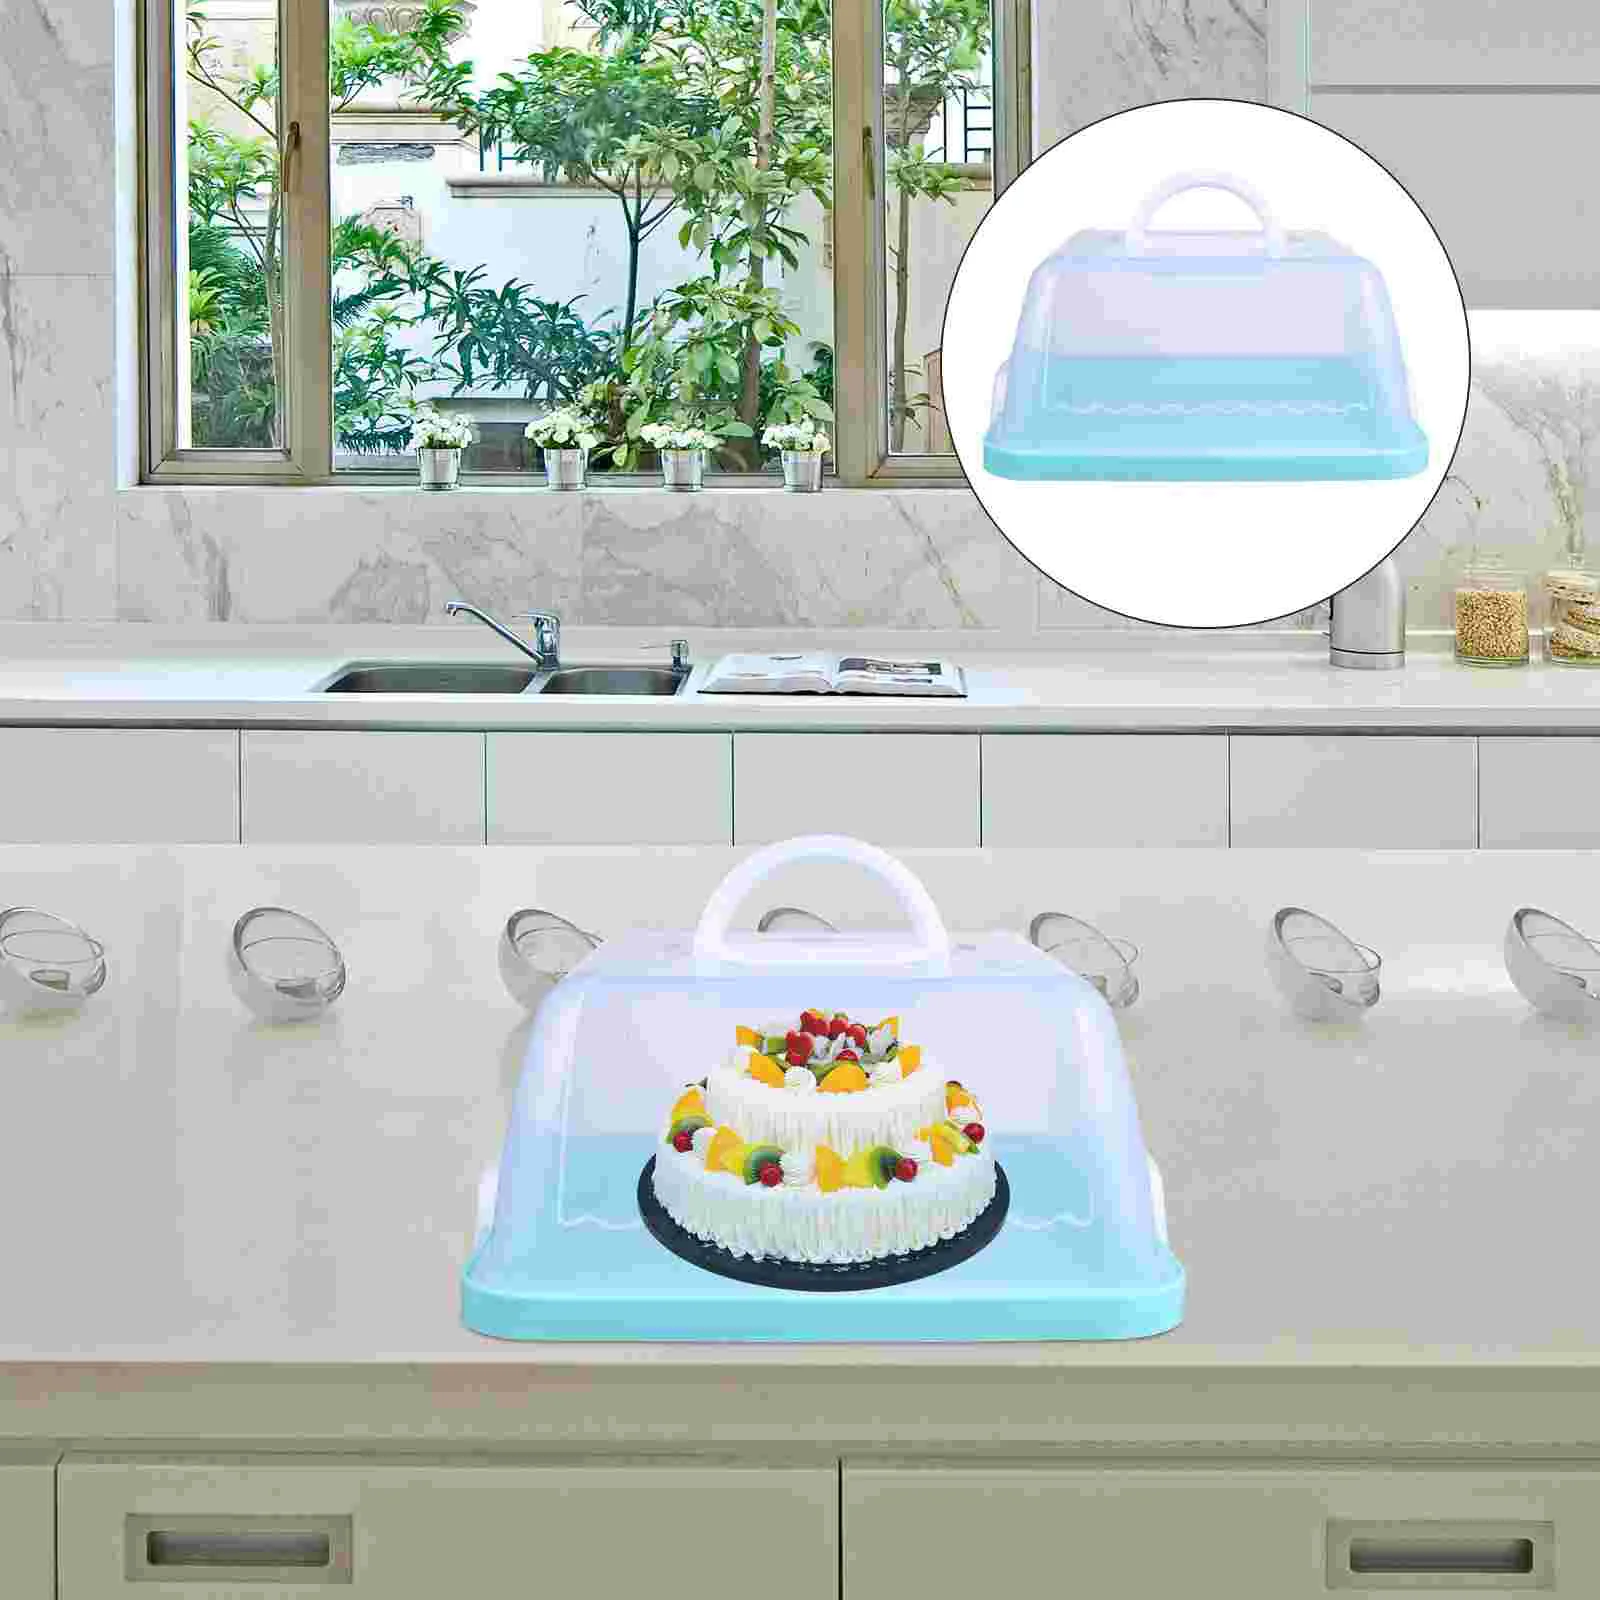 

Portable Cake Box Pie Carrier Translucent Container Cupcake Containers Storage Holder Lid Travel Muffins Comtainer Transporter